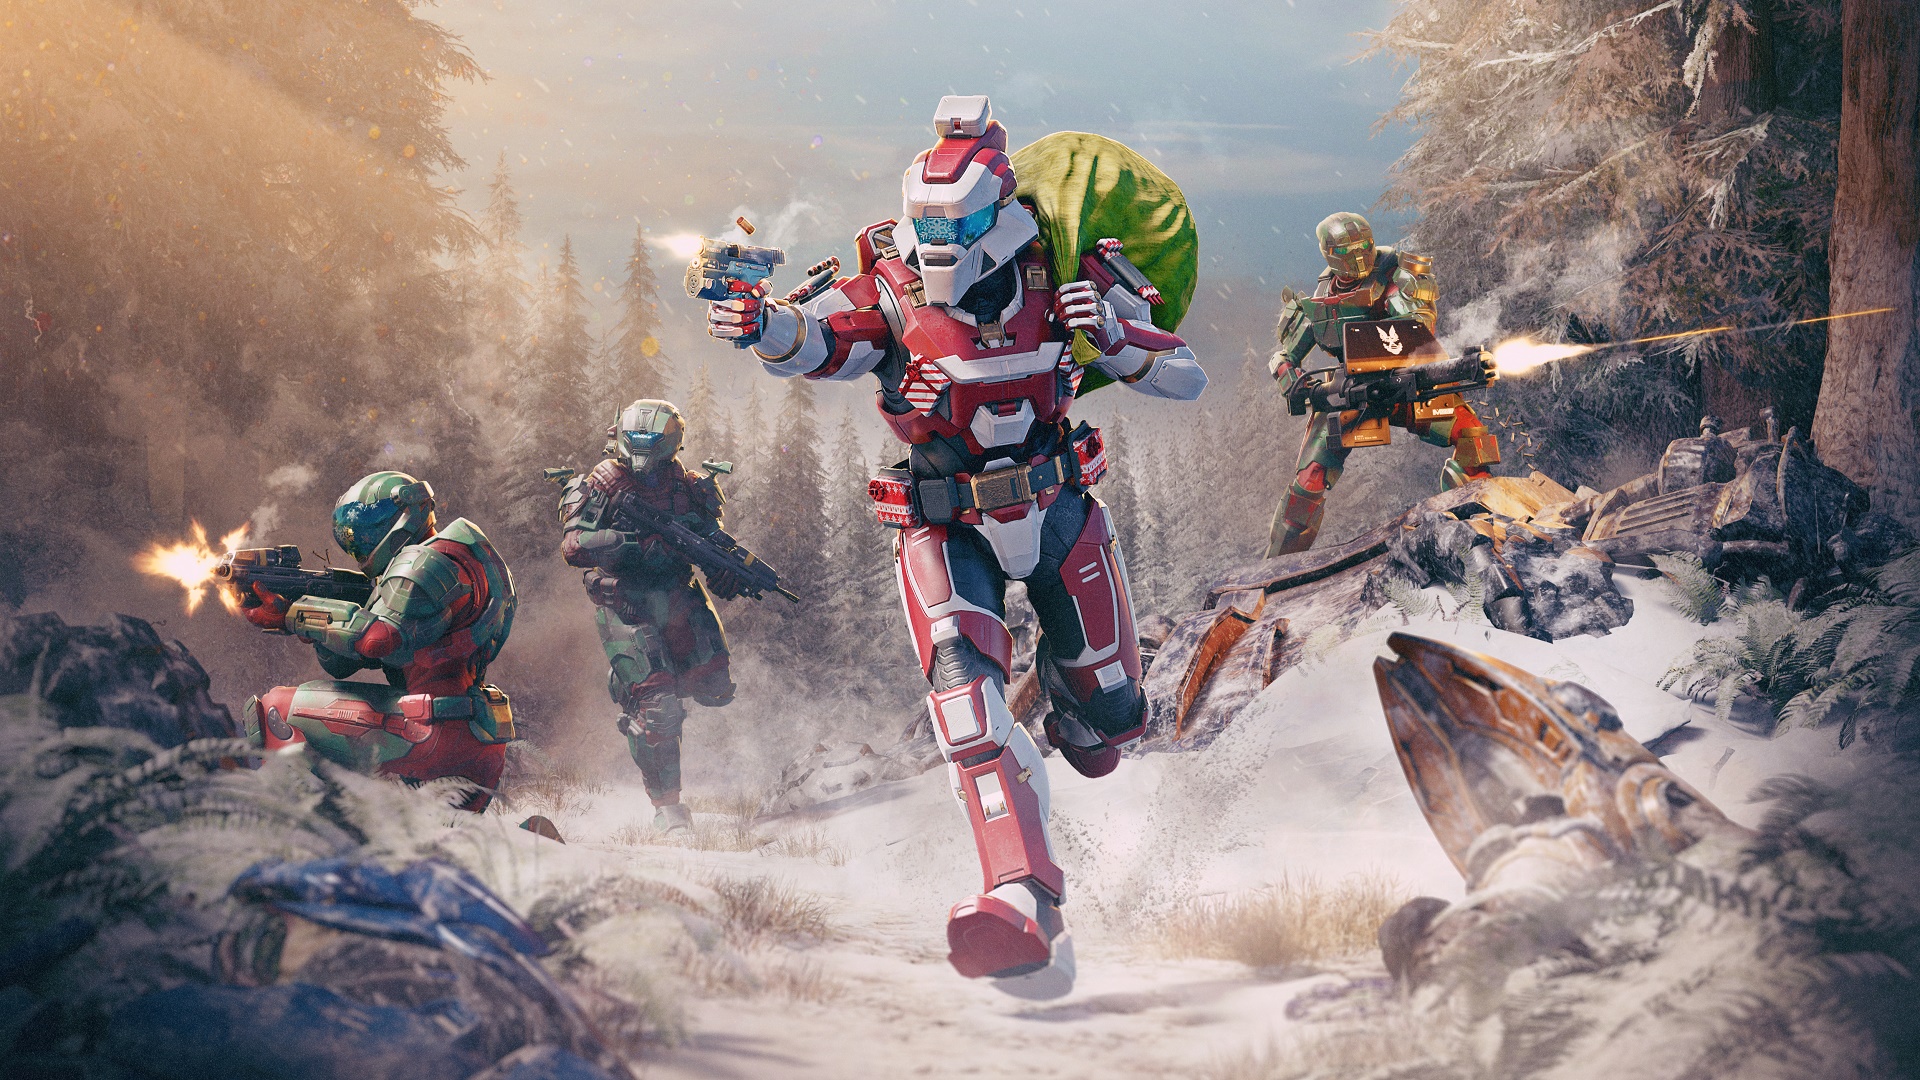 Halo Infinite key art for the Winter Contingency III Operation, showcasing four Spartans in the snow with the central one clad in Santa-inspired armor holding a green sack over their back